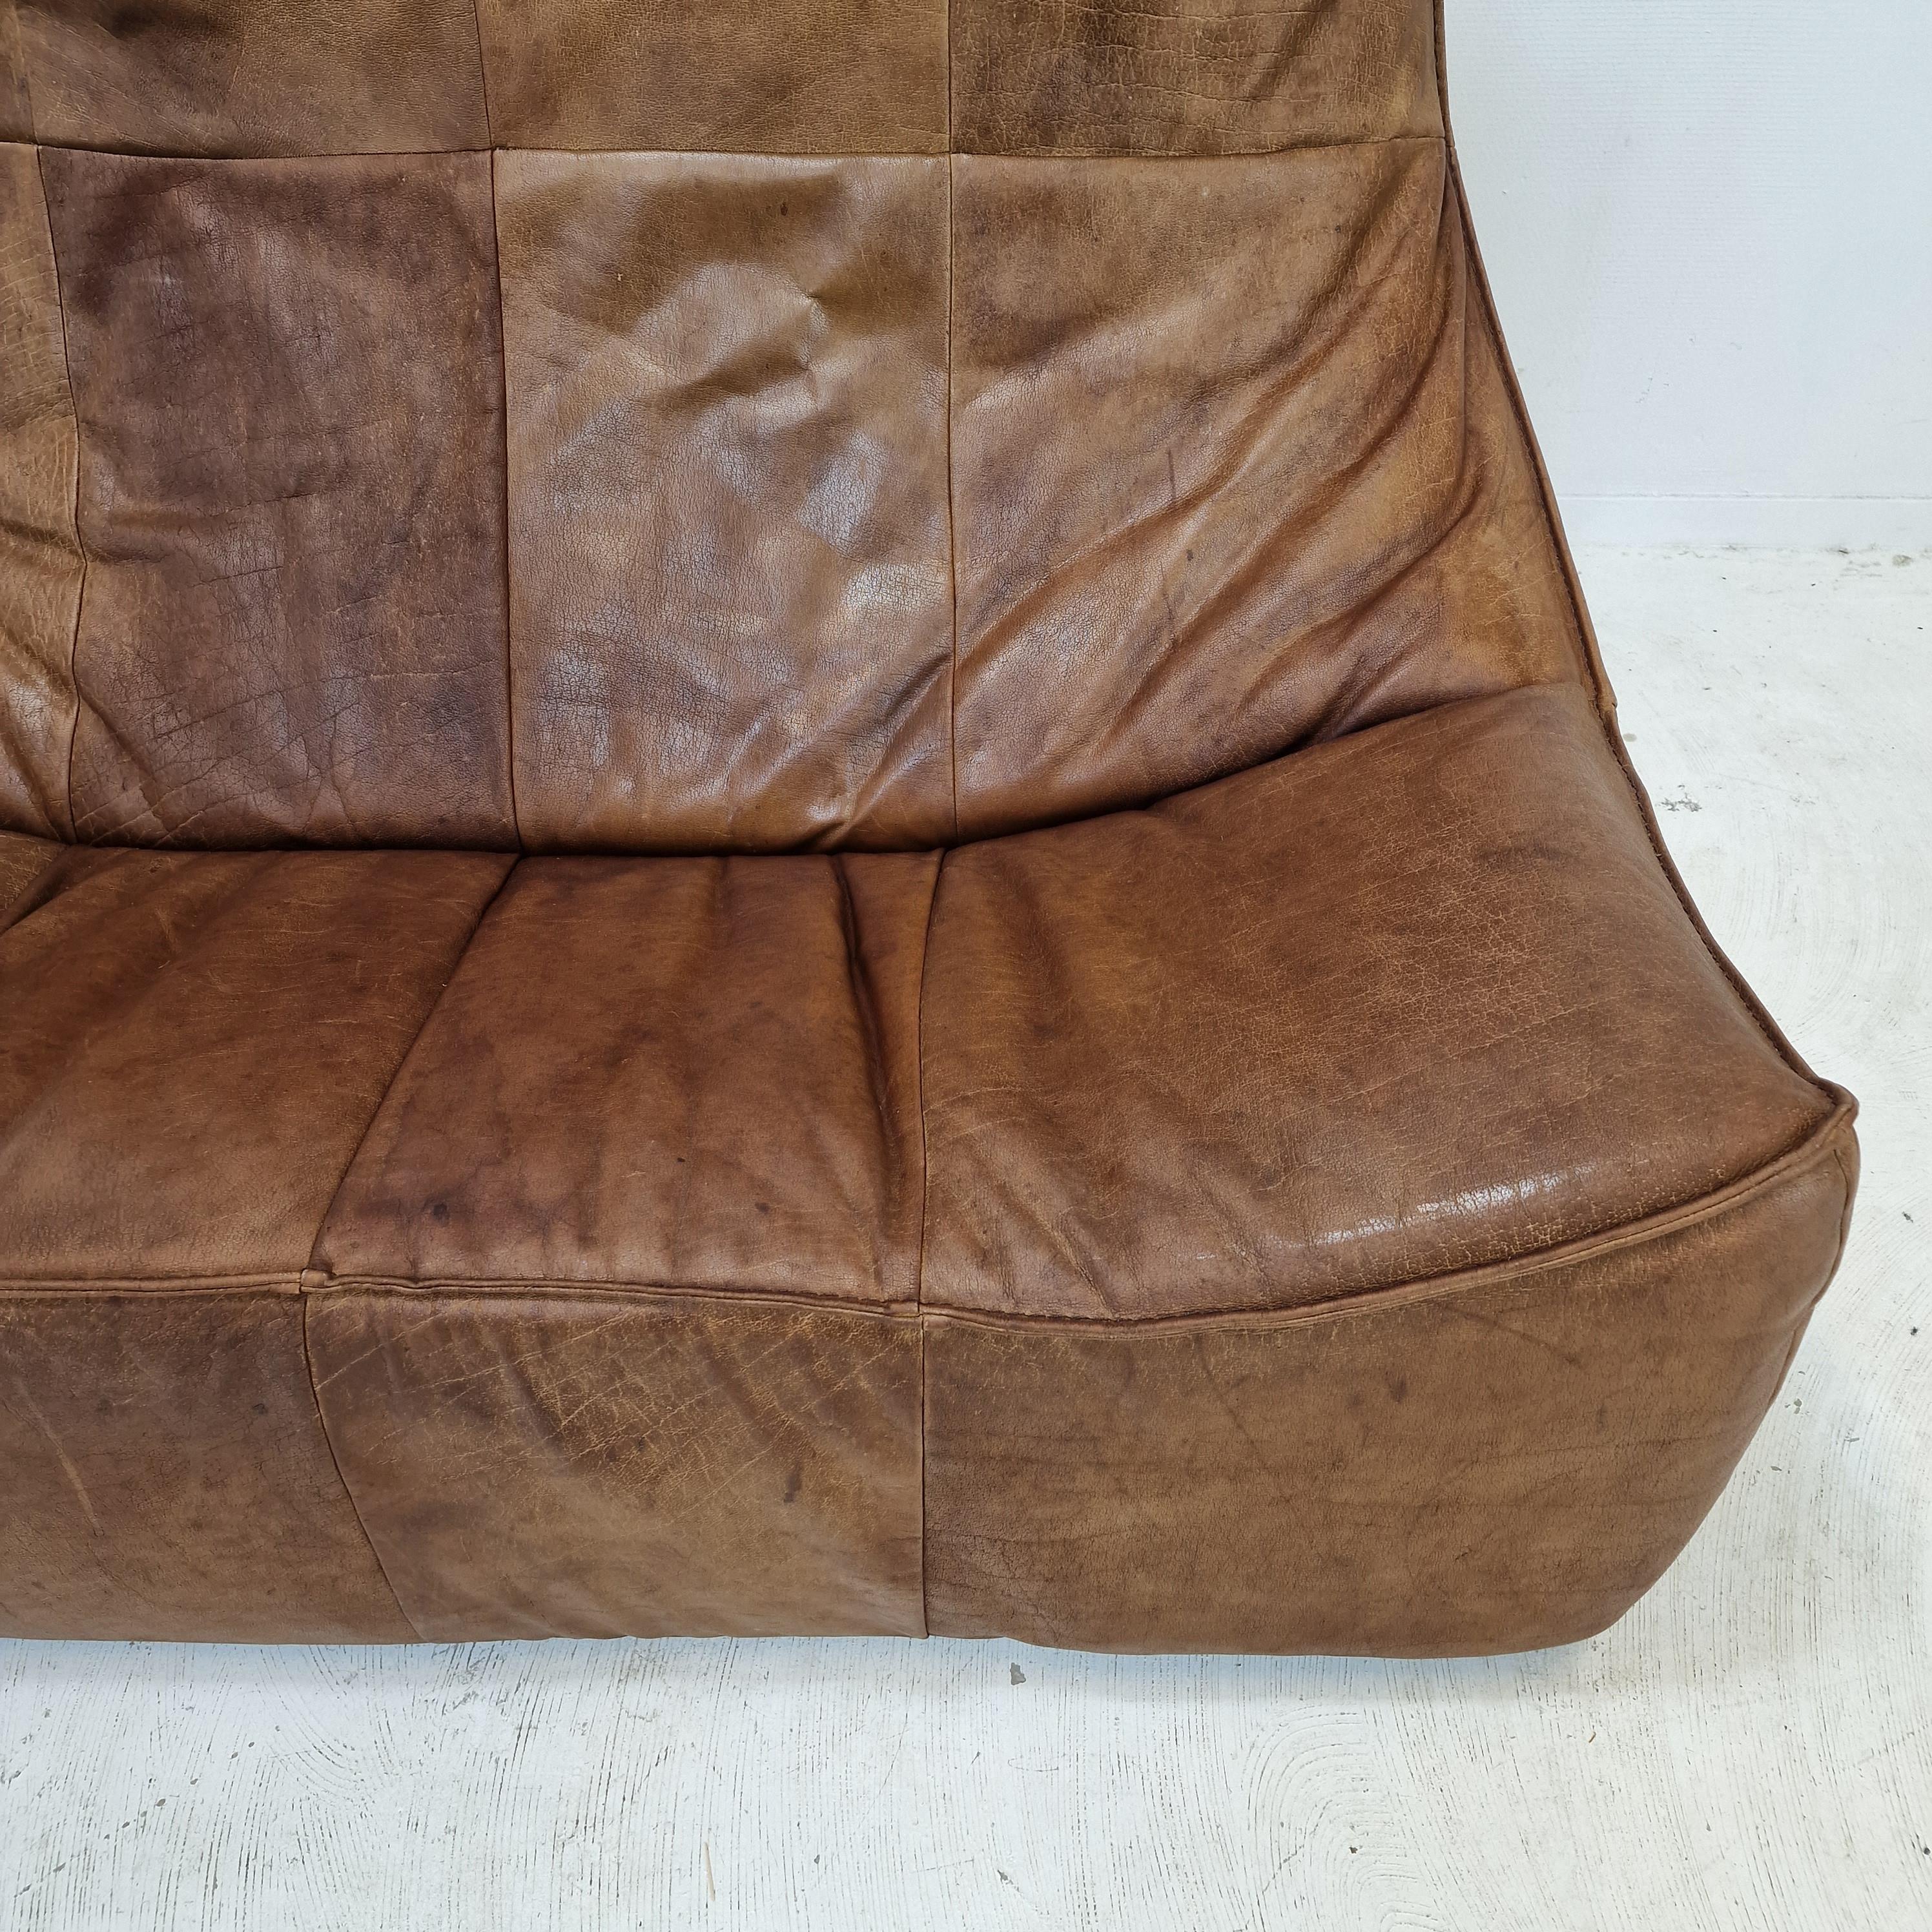 Montis “The Rock” Sofa In Brown Leather By Gerard Van Den Berg, 1970s For Sale 12